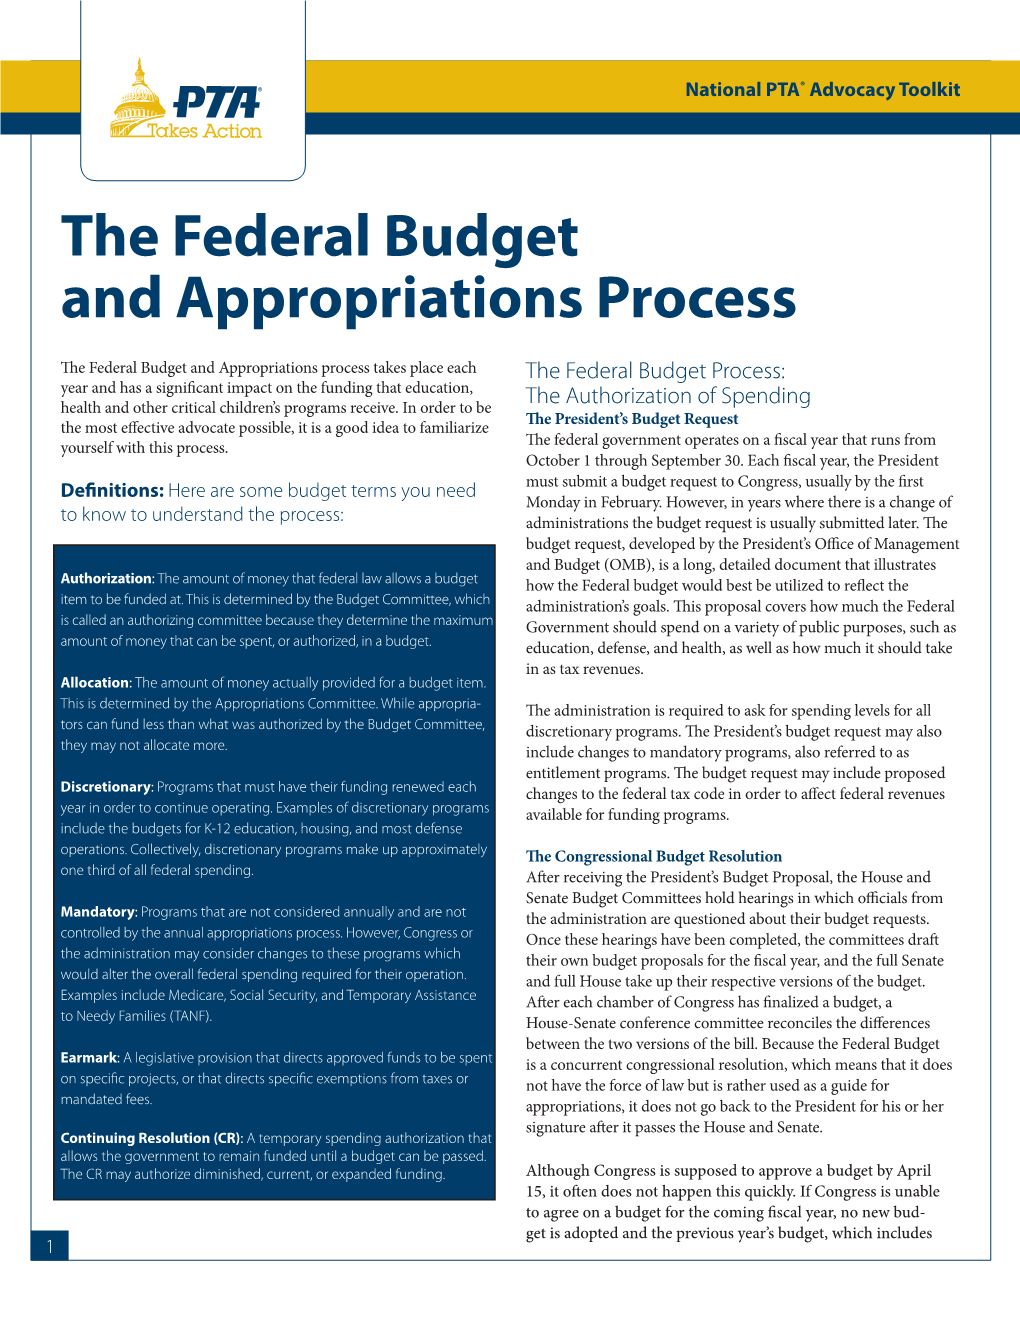 The Federal Budget and Appropriations Process